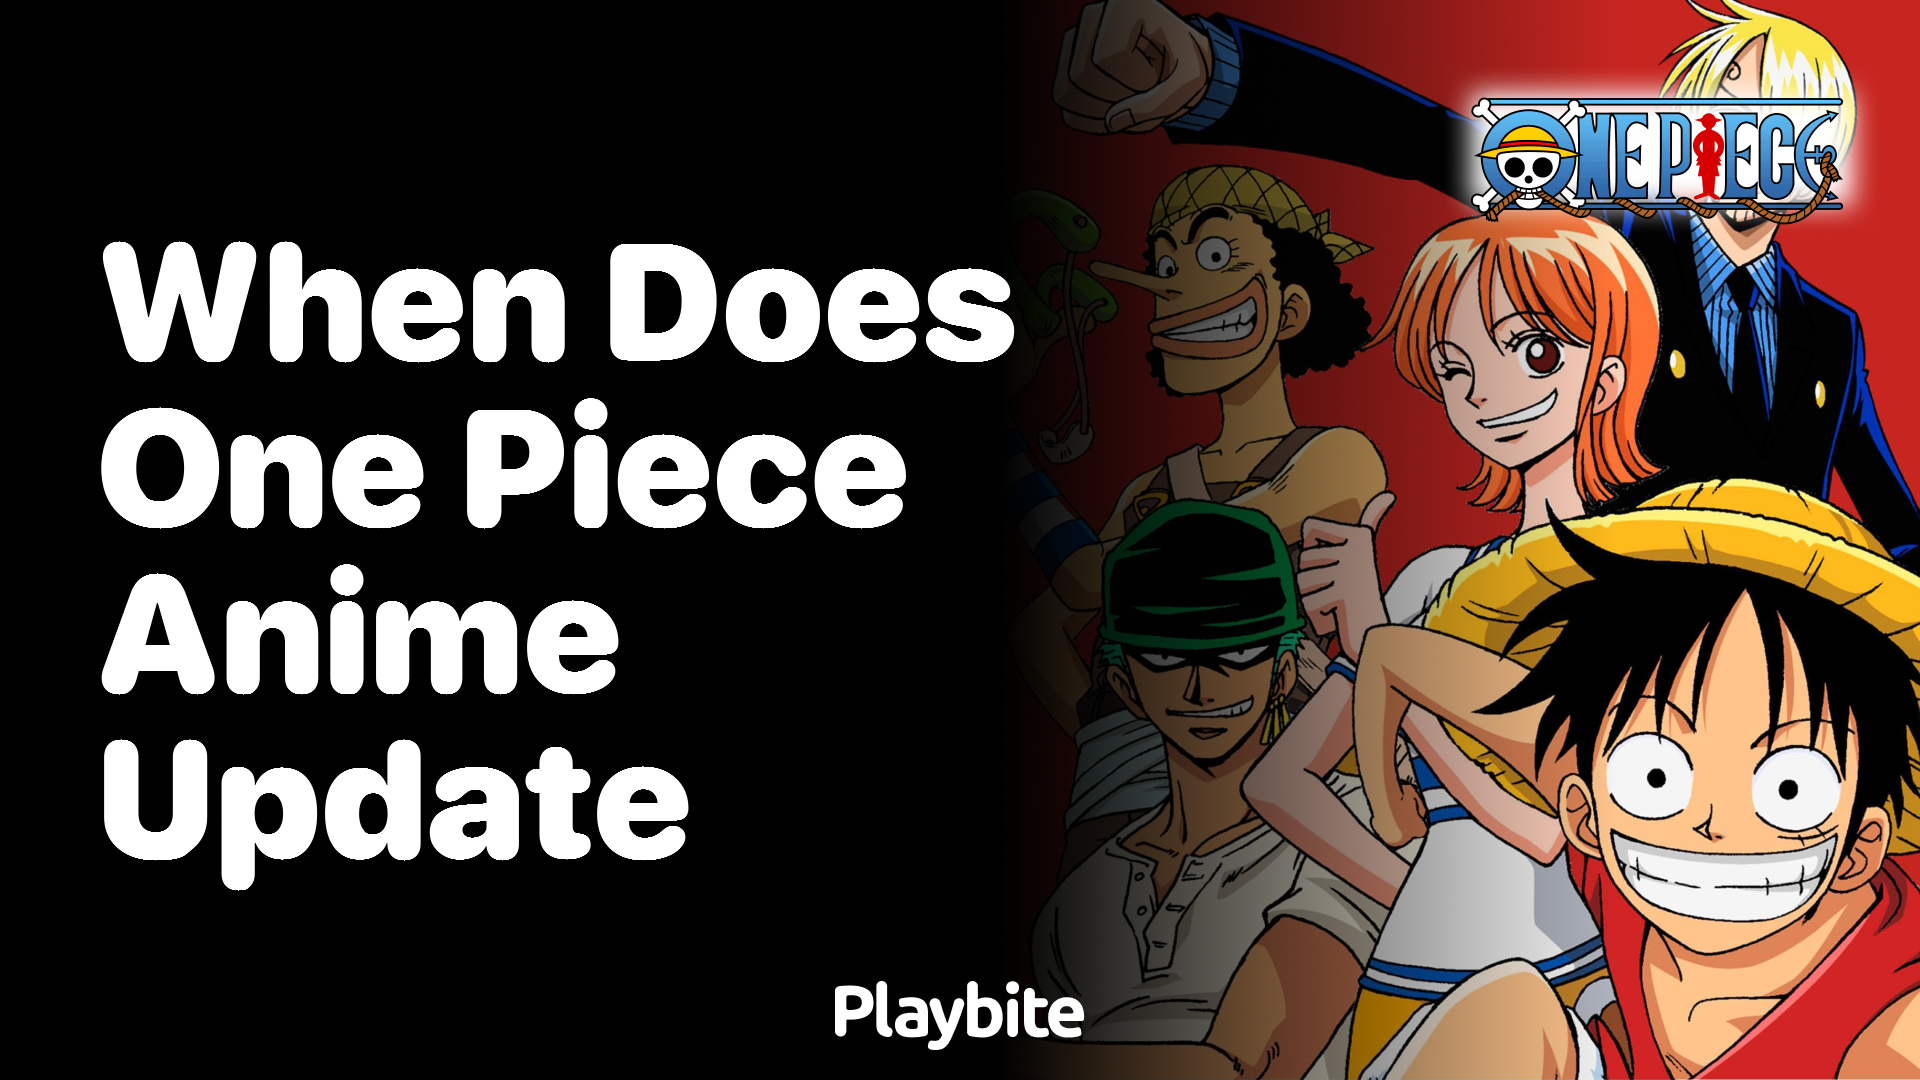 When does the One Piece anime update?